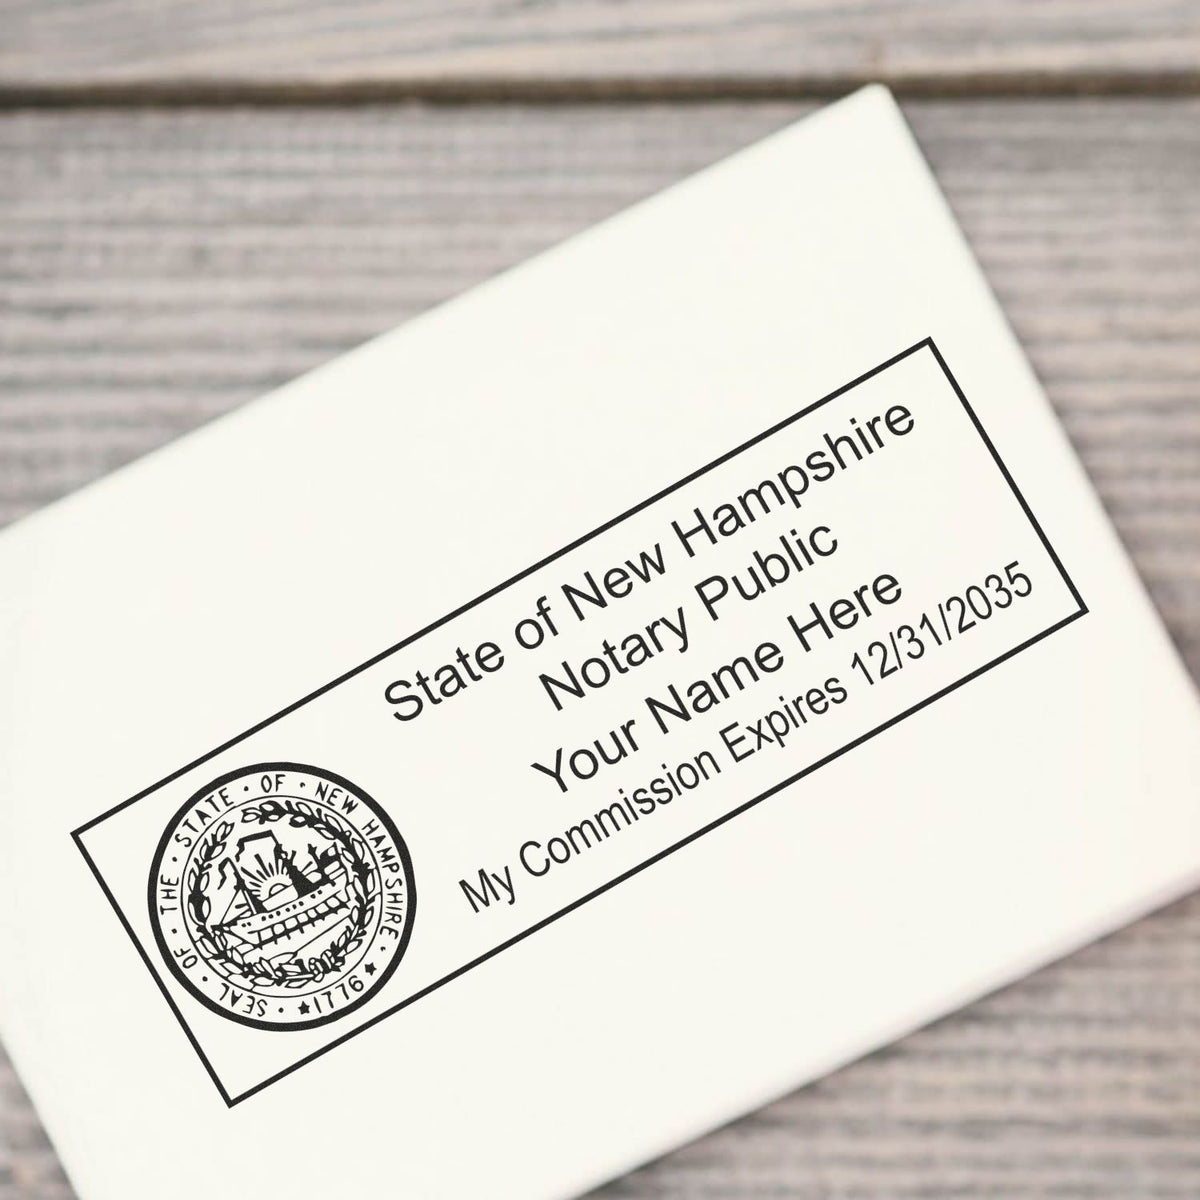 A lifestyle photo showing a stamped image of the Heavy-Duty New Hampshire Rectangular Notary Stamp on a piece of paper